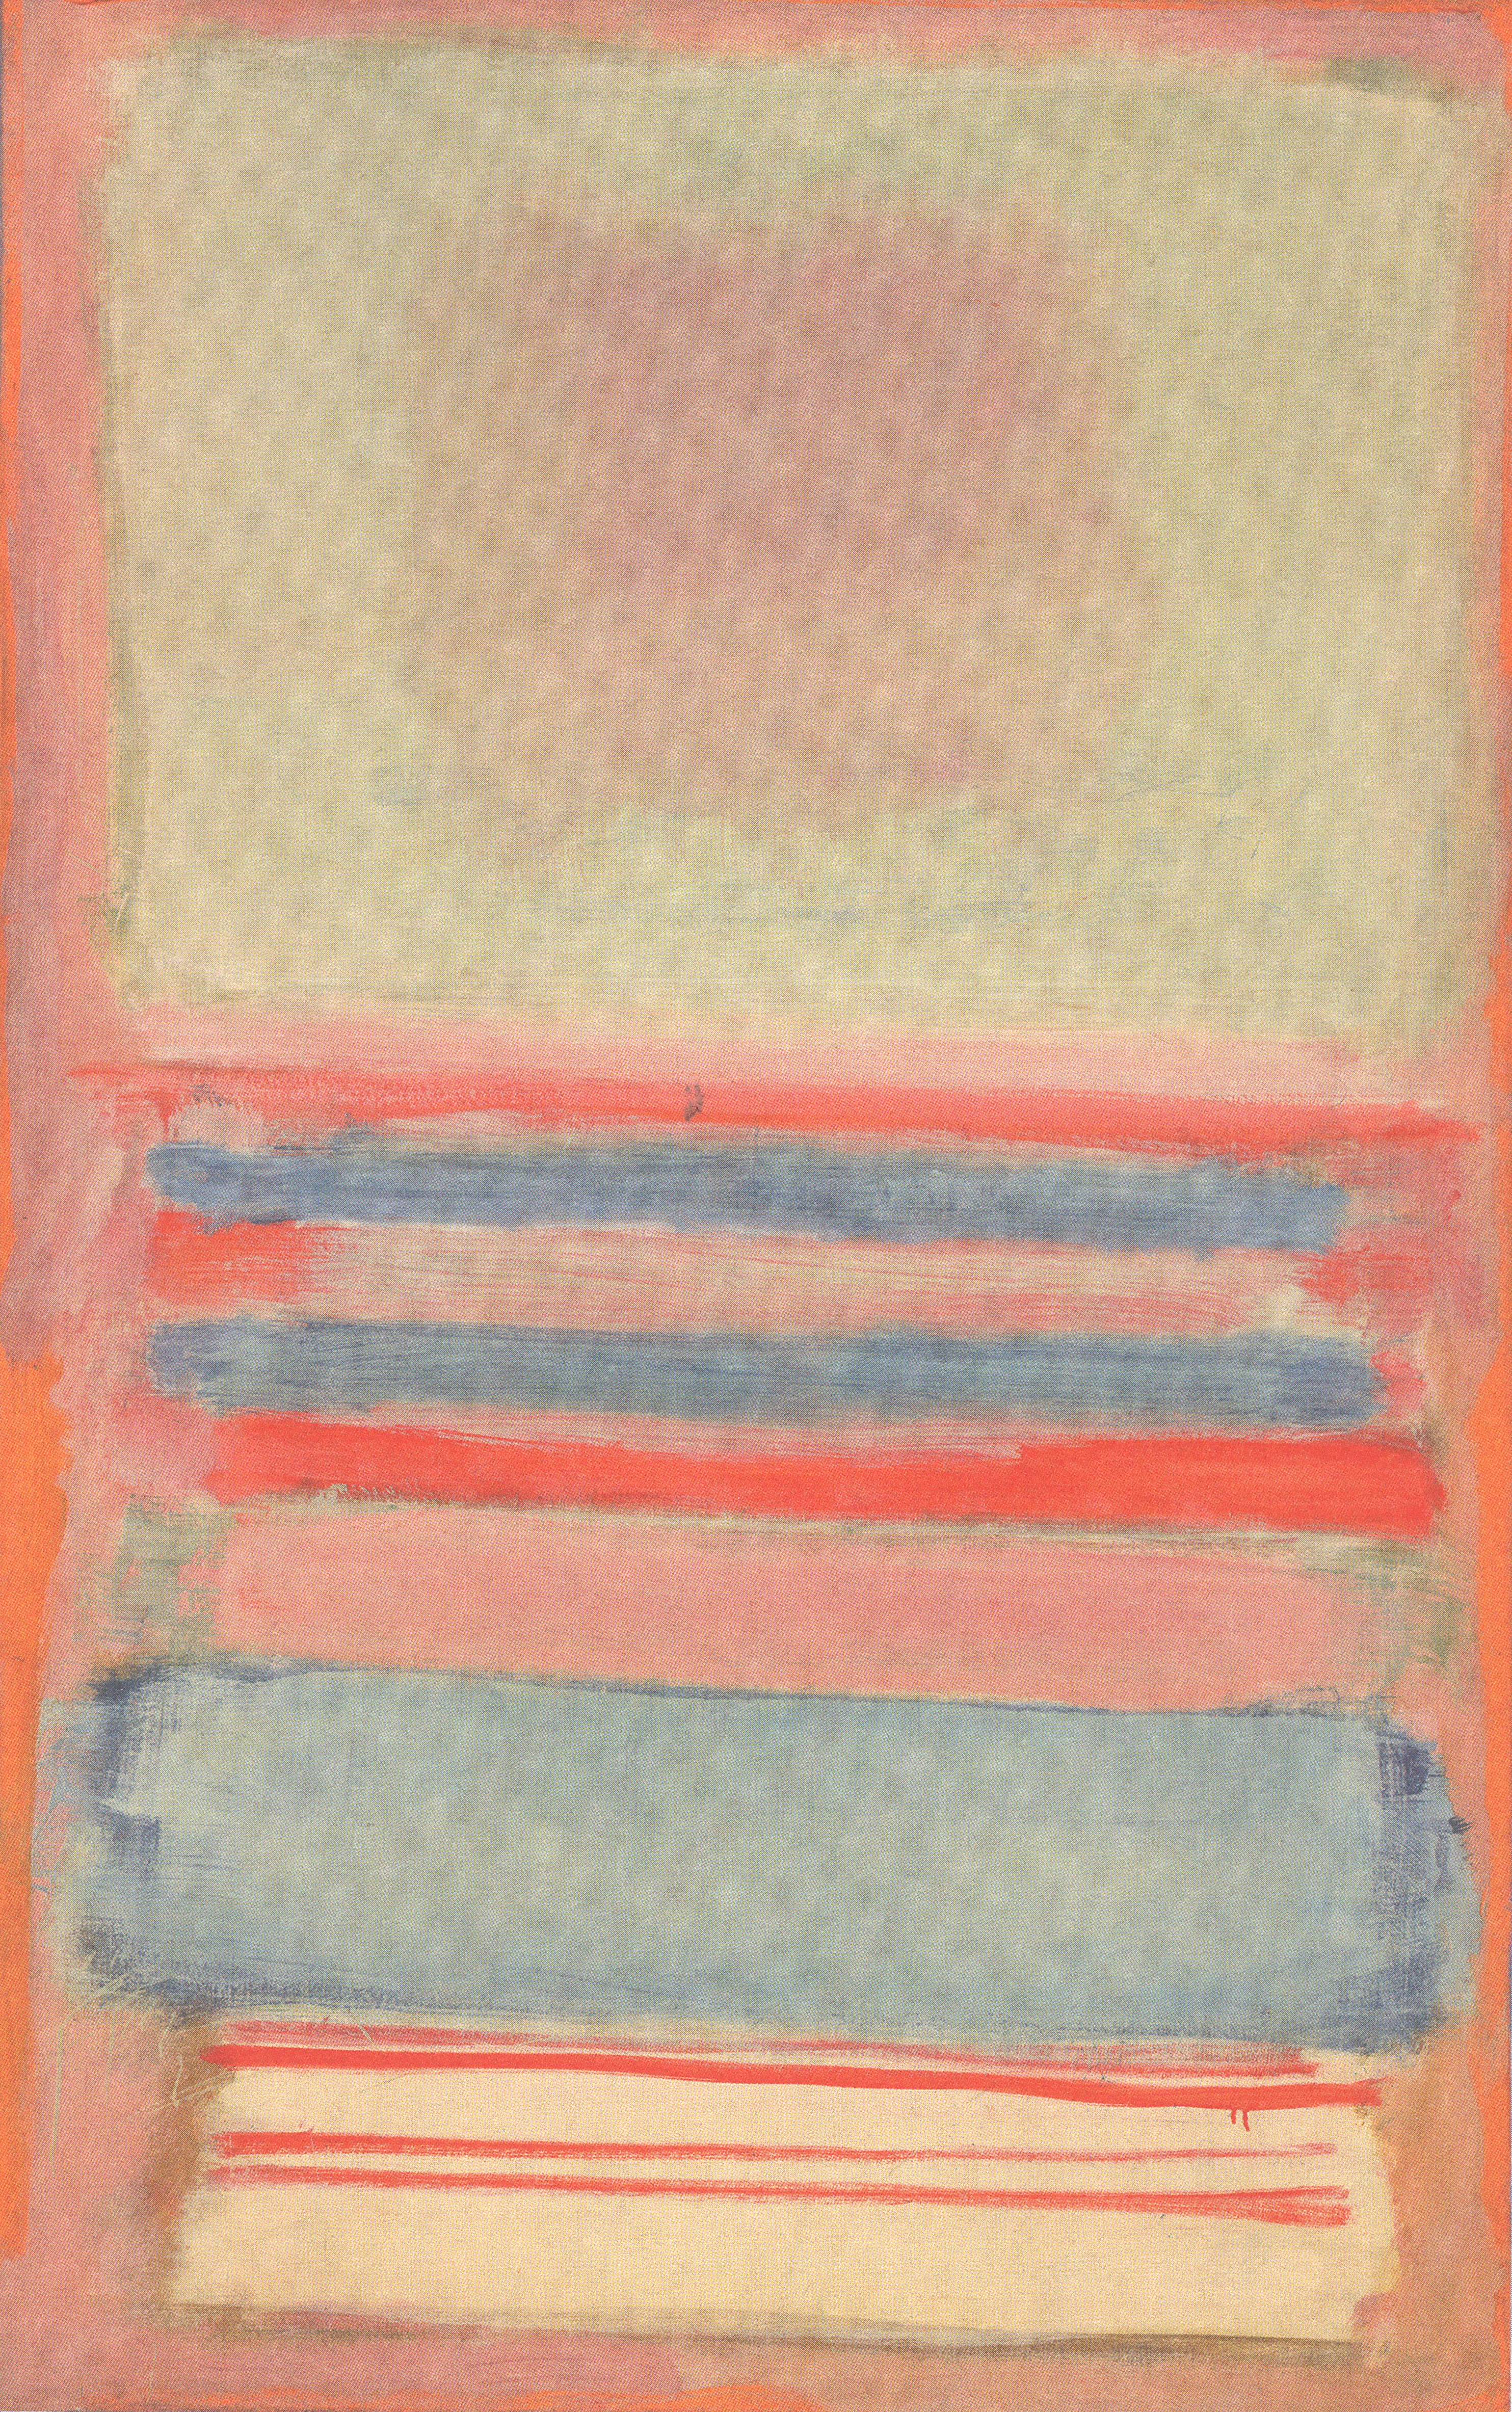 no-7-or-no-11-by-mark-rothko-1949-oil-paint-on-canvas-173-x-111-cm